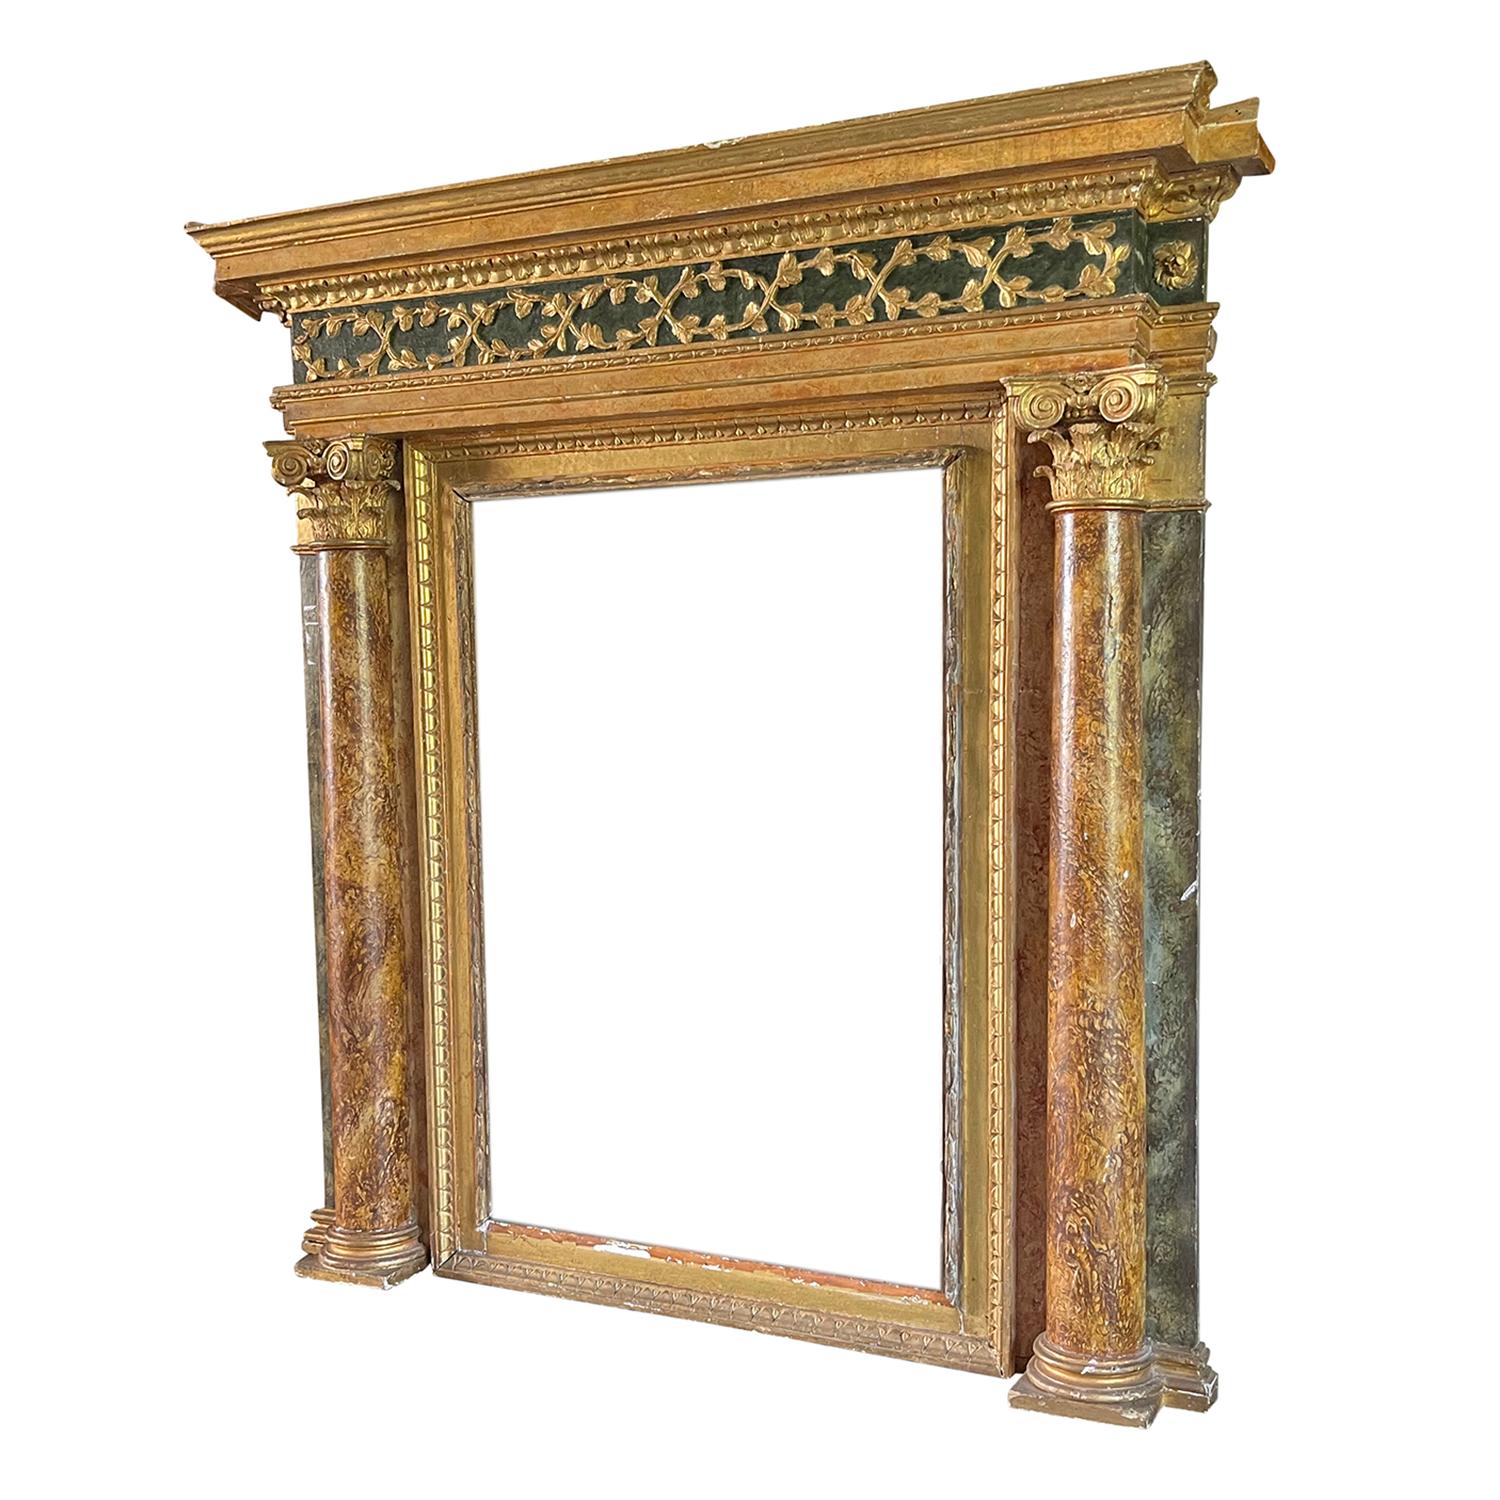 16th Century Italian Renaissance Fireplace Mantel Piece - Antique Surround In Good Condition For Sale In West Palm Beach, FL